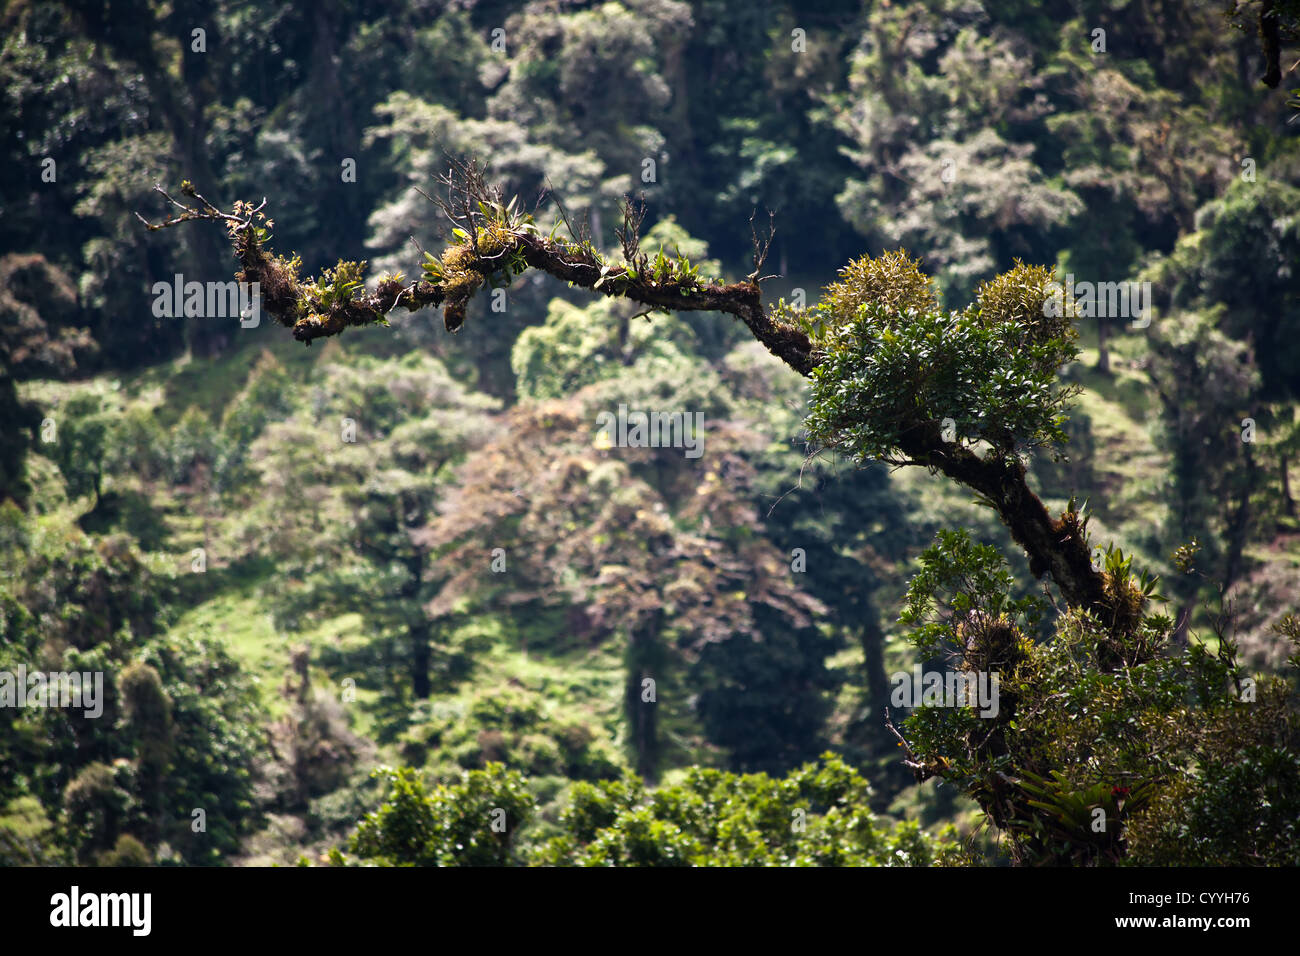 Epiphytes and bromeliads on tree branch in Costa Rica Stock Photo